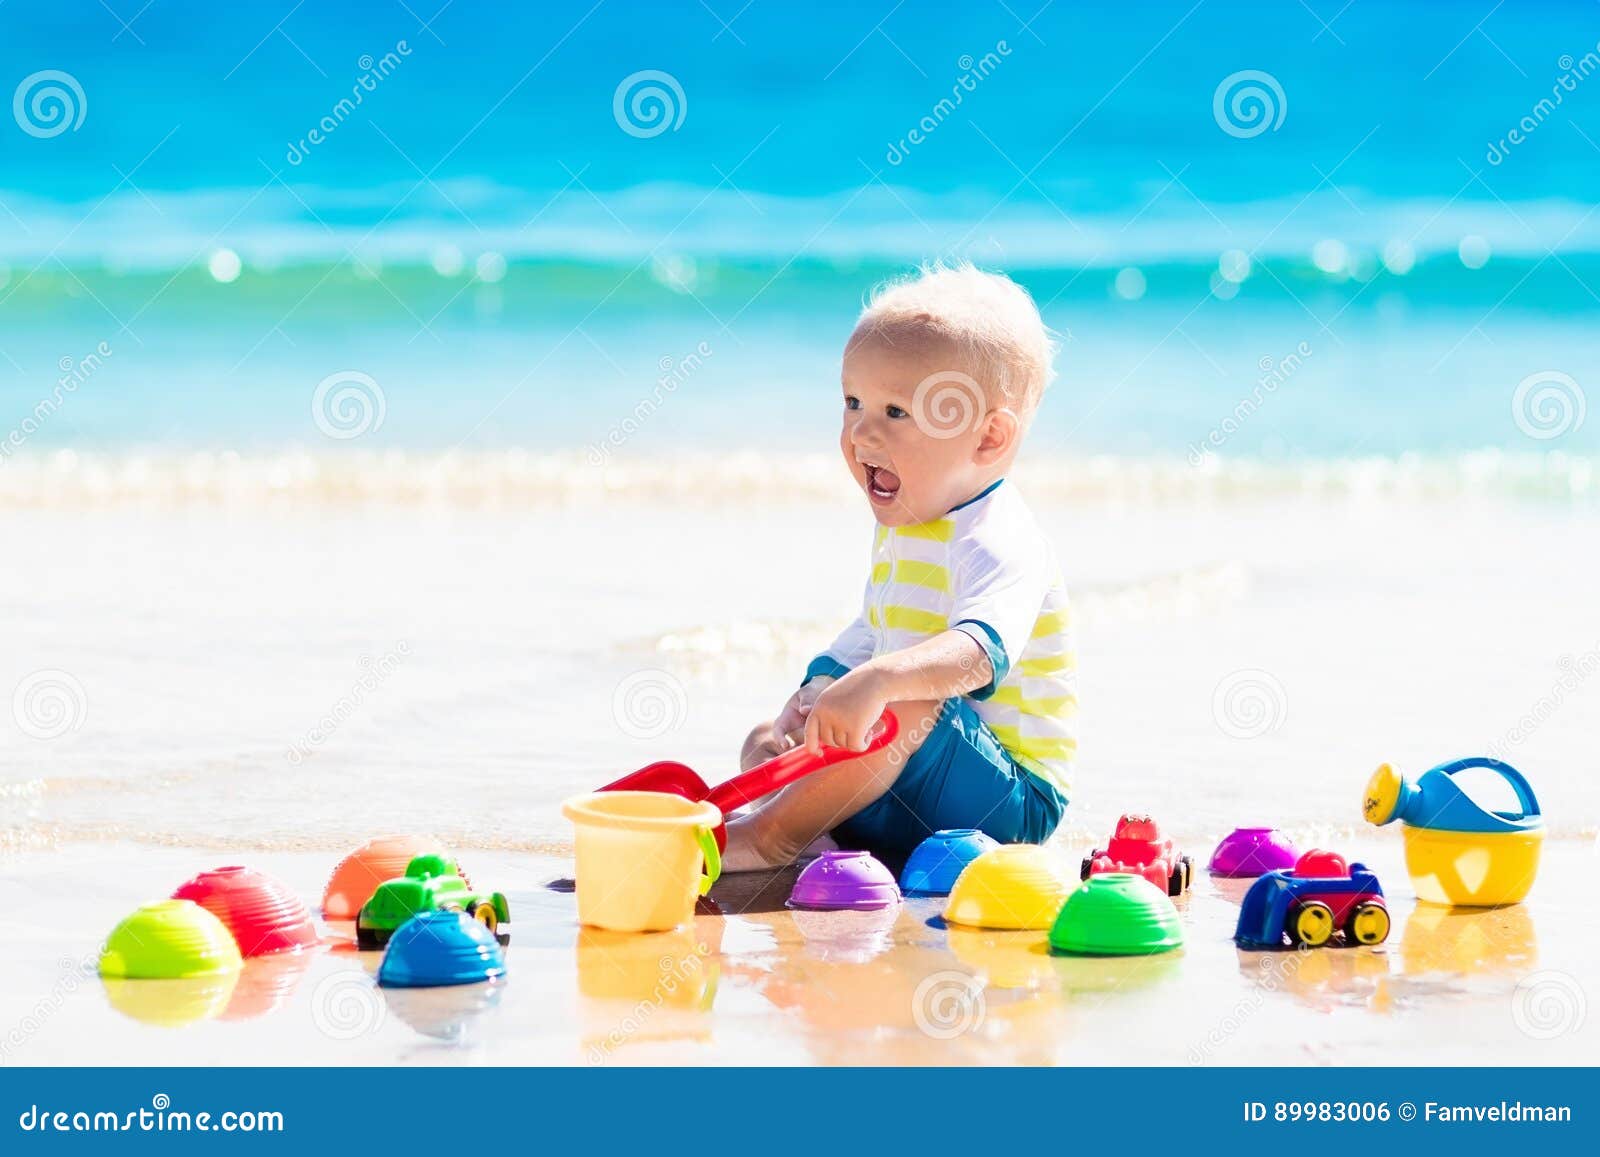 Baby Playing on Tropical Beach Digging in Sand Stock Photo - Image